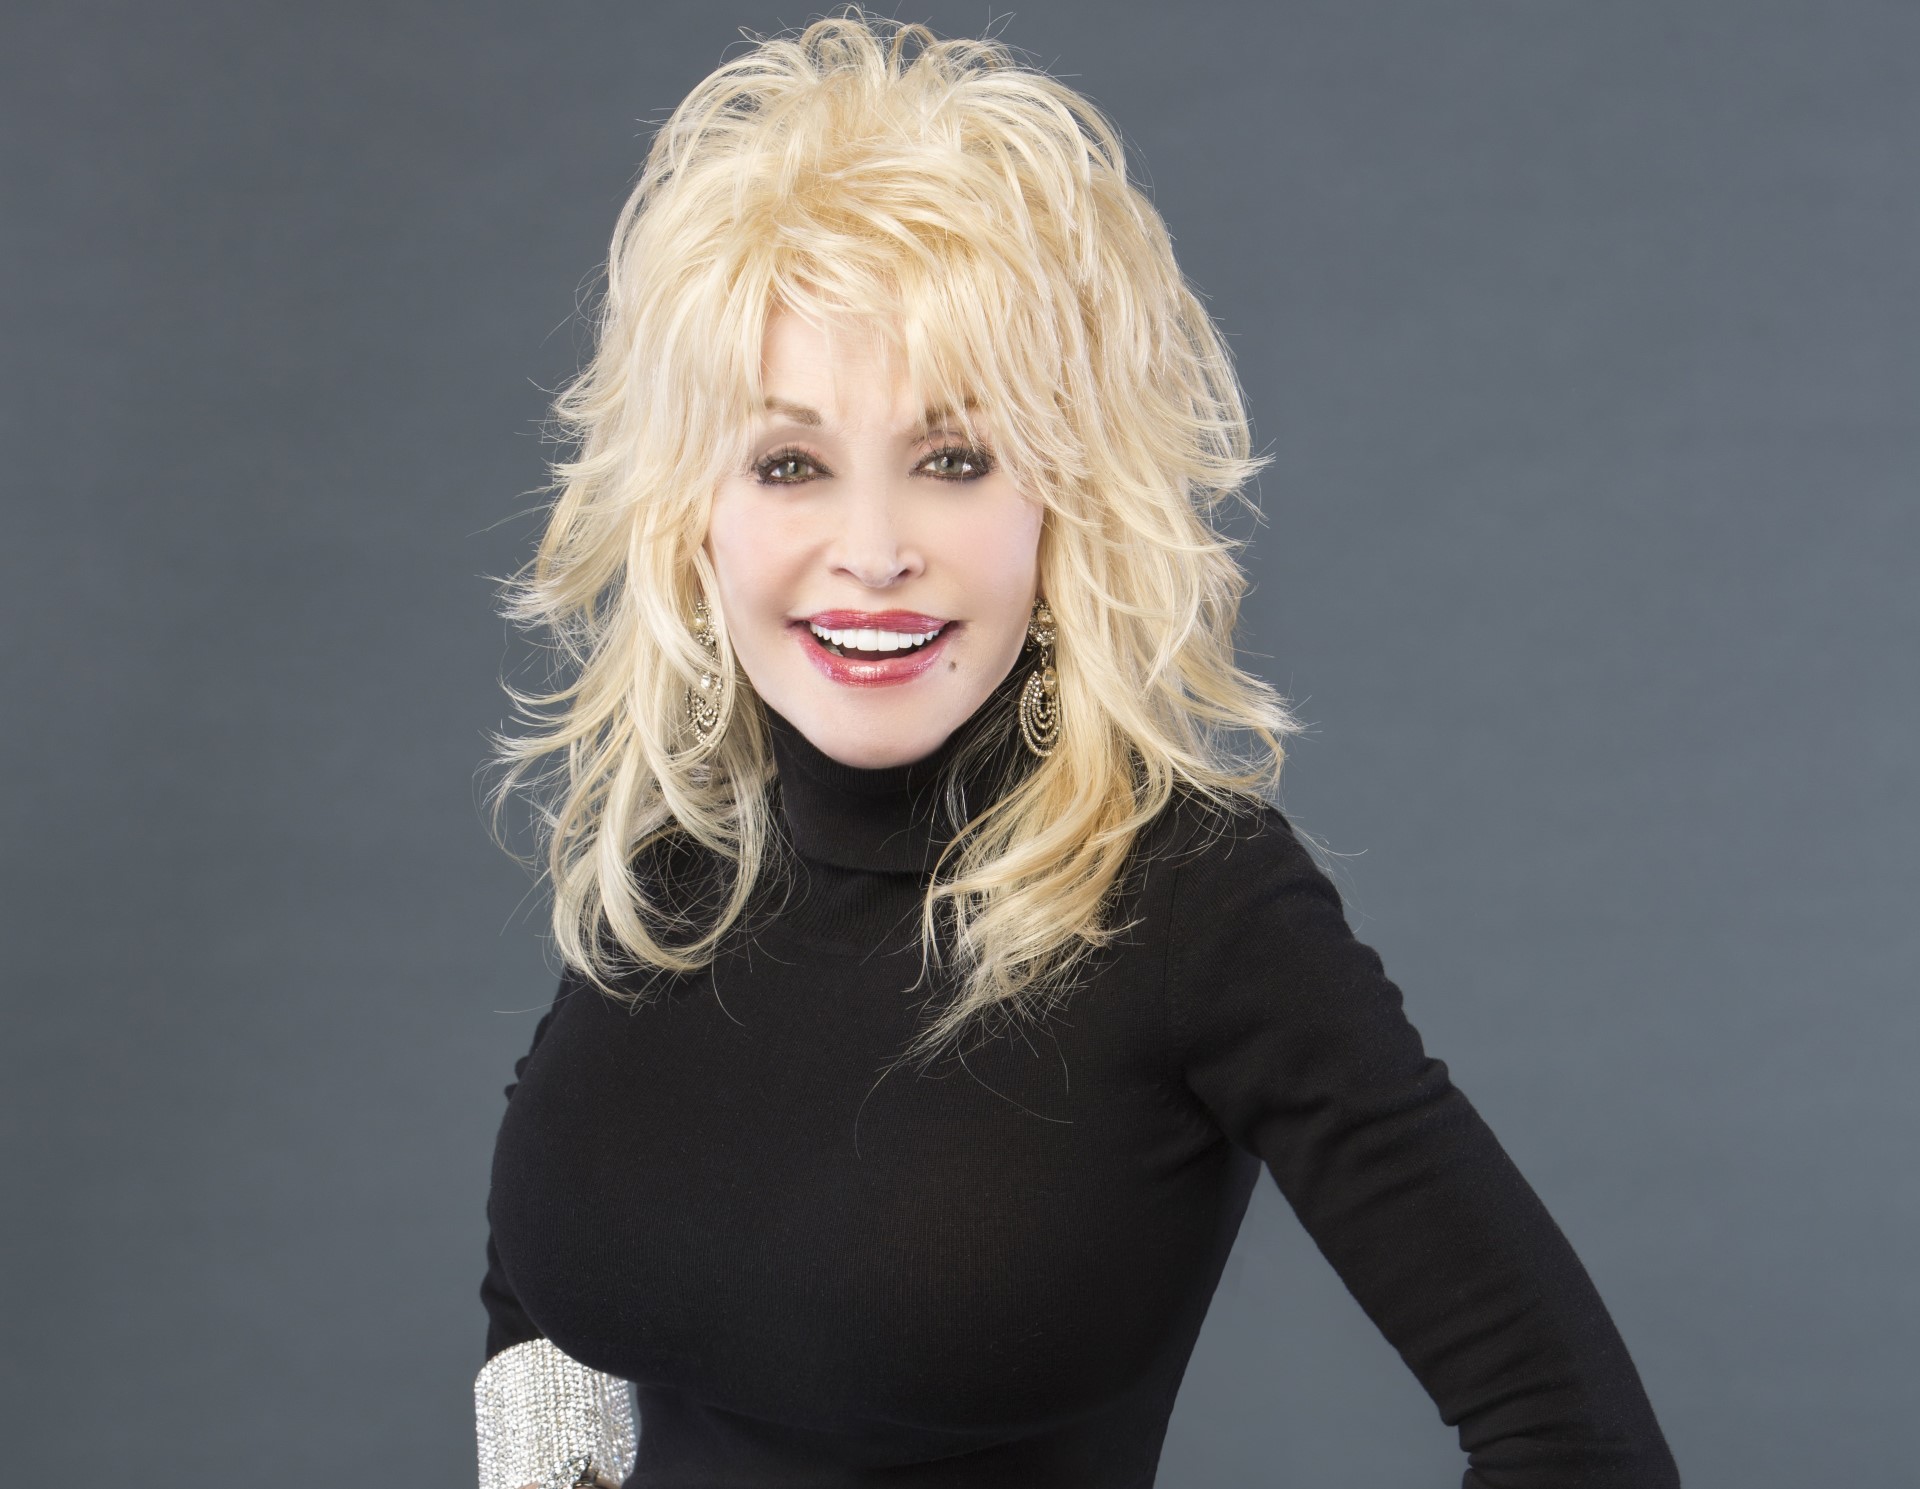 How old is Dolly Parton? Age, career timeline & more to know about